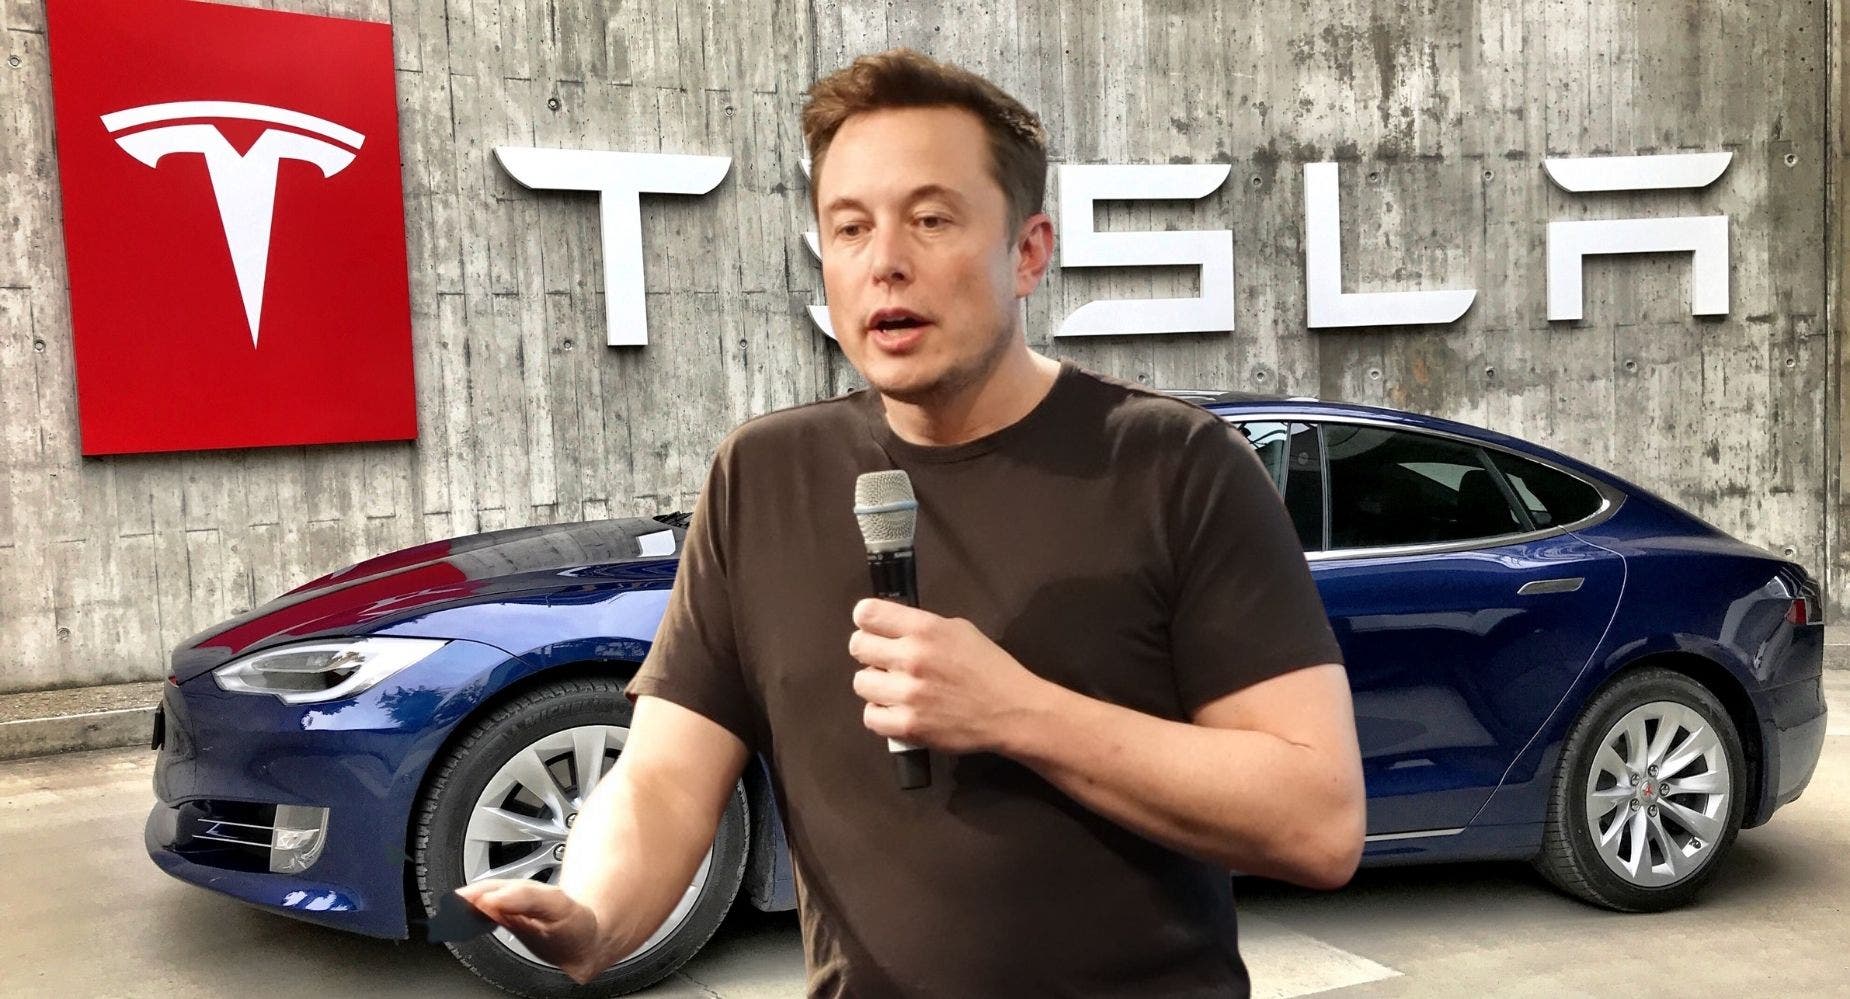 Elon Musk's Take On $440M Autonomy Contract: 'Production Much Bigger Challenge Than Demand'